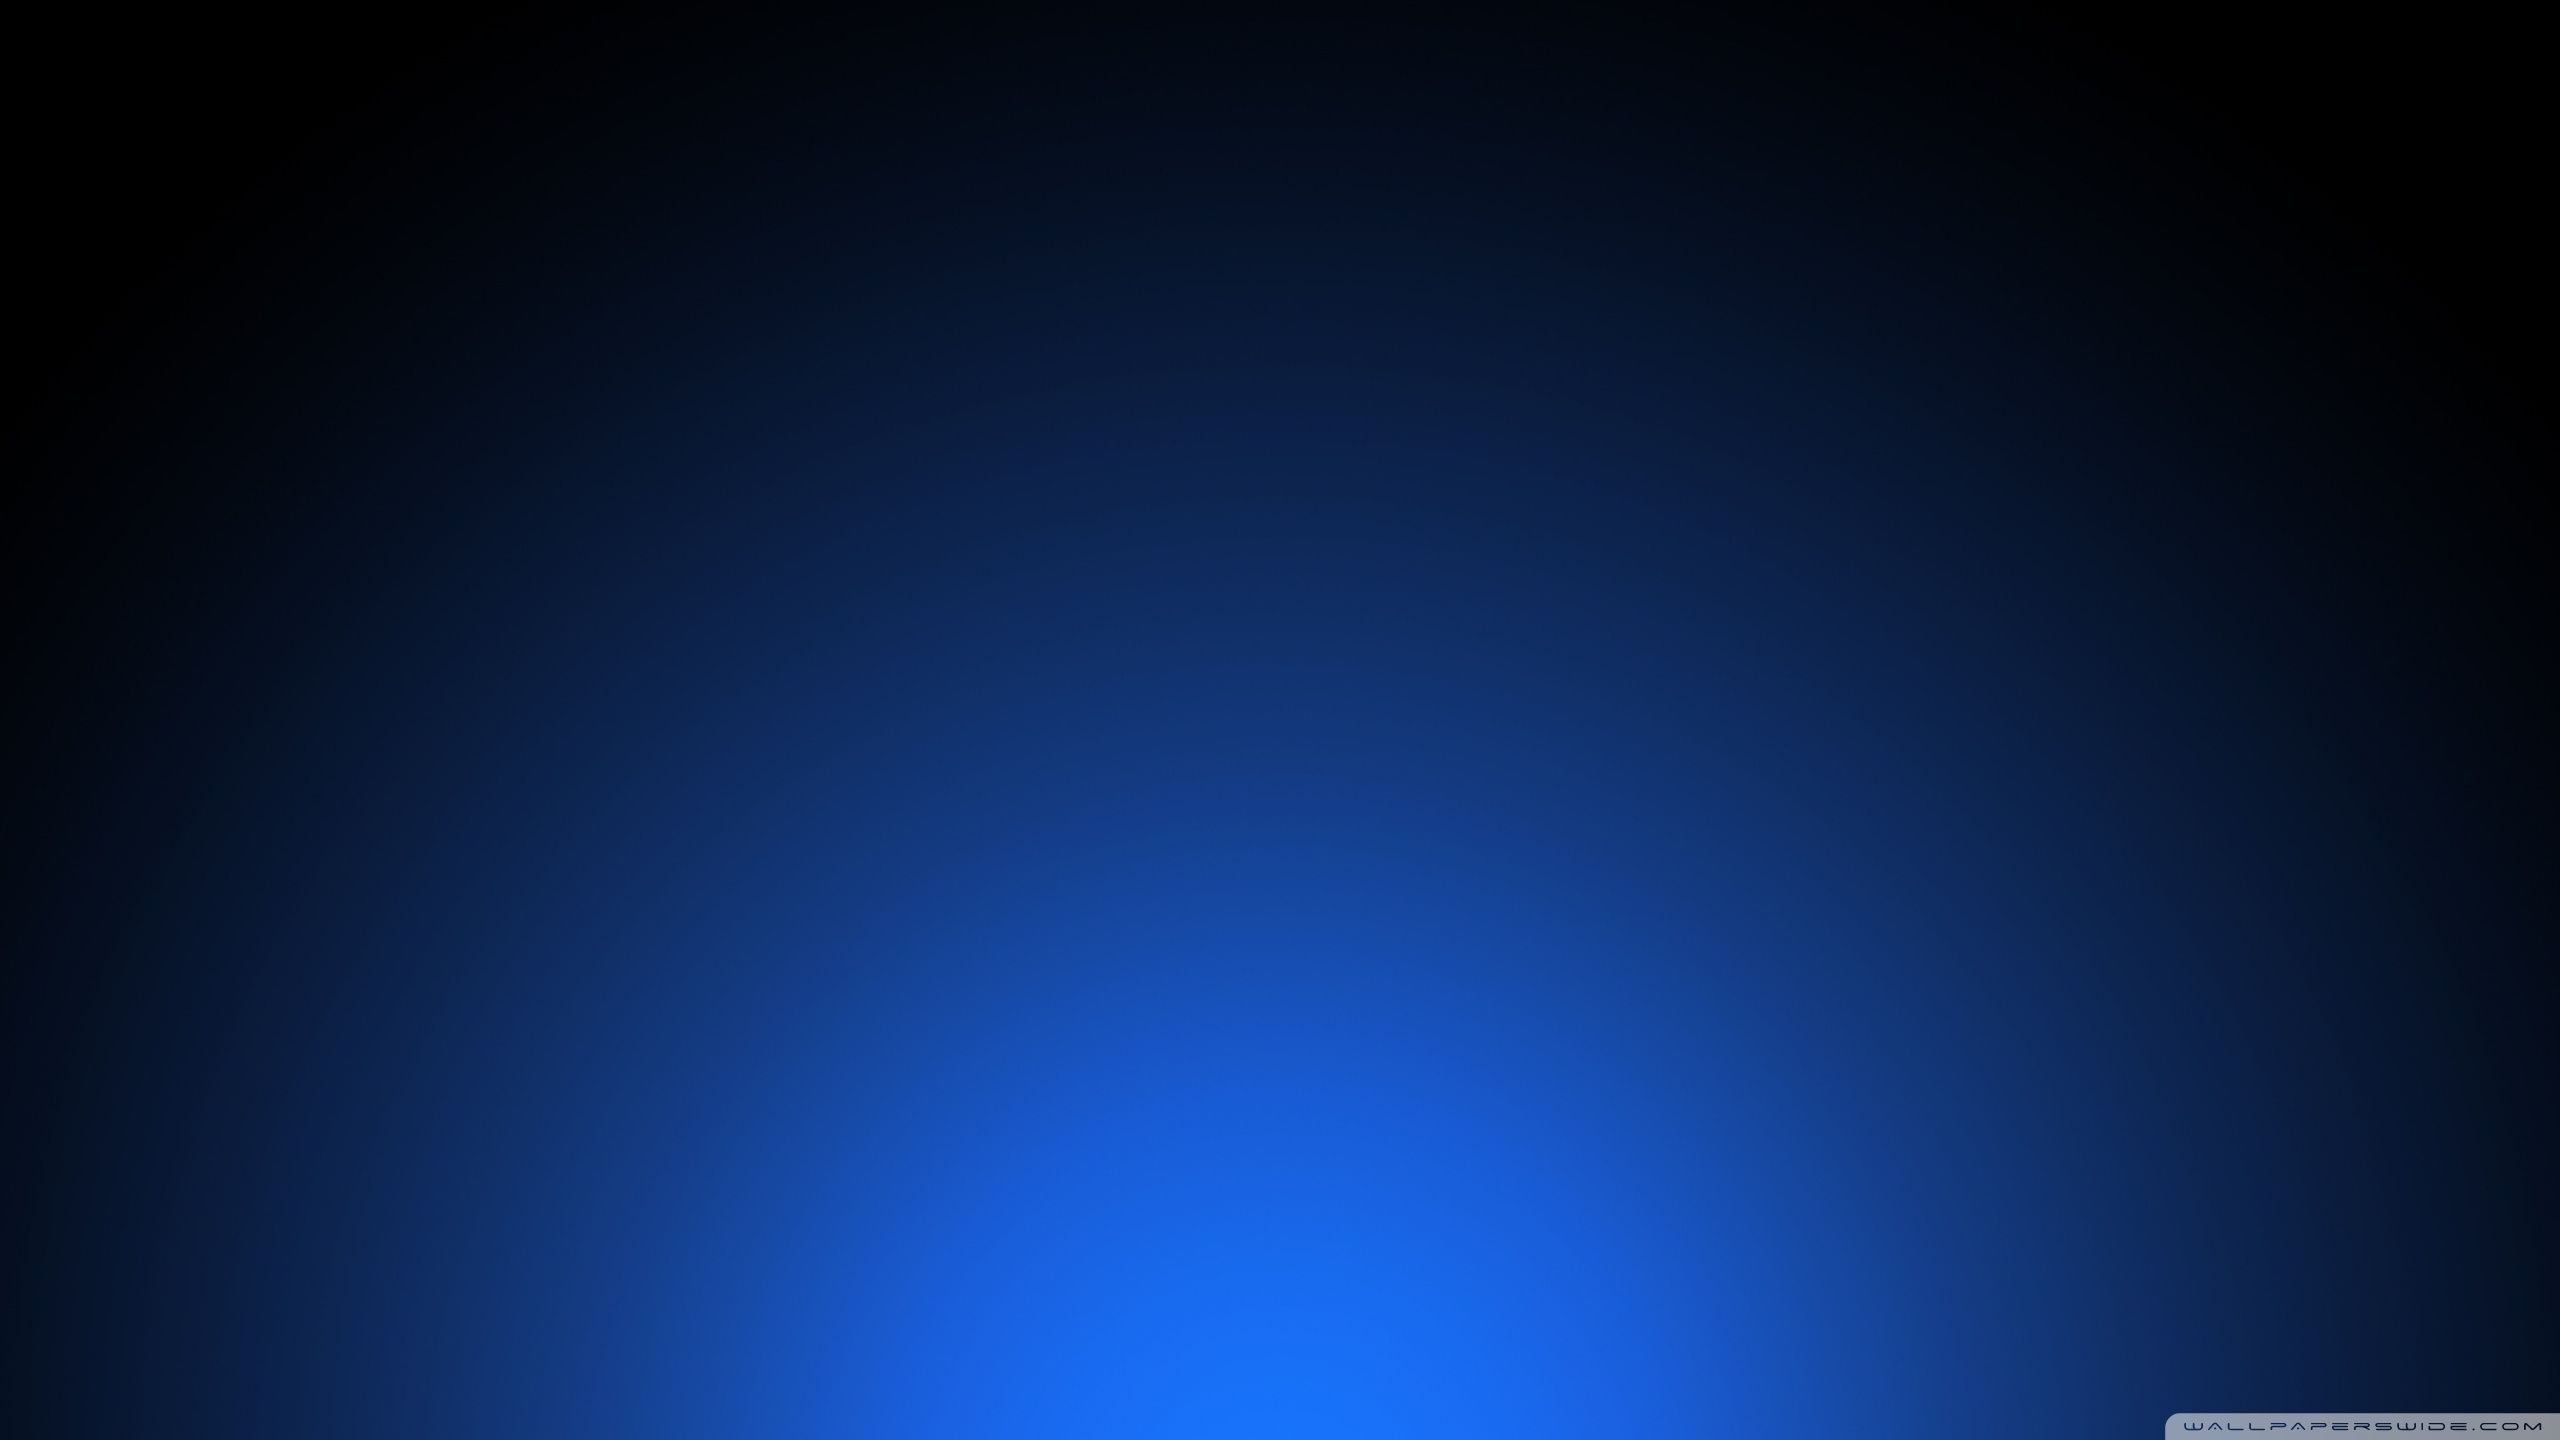 blue and black backgrounds wallpapers download blue and black hd